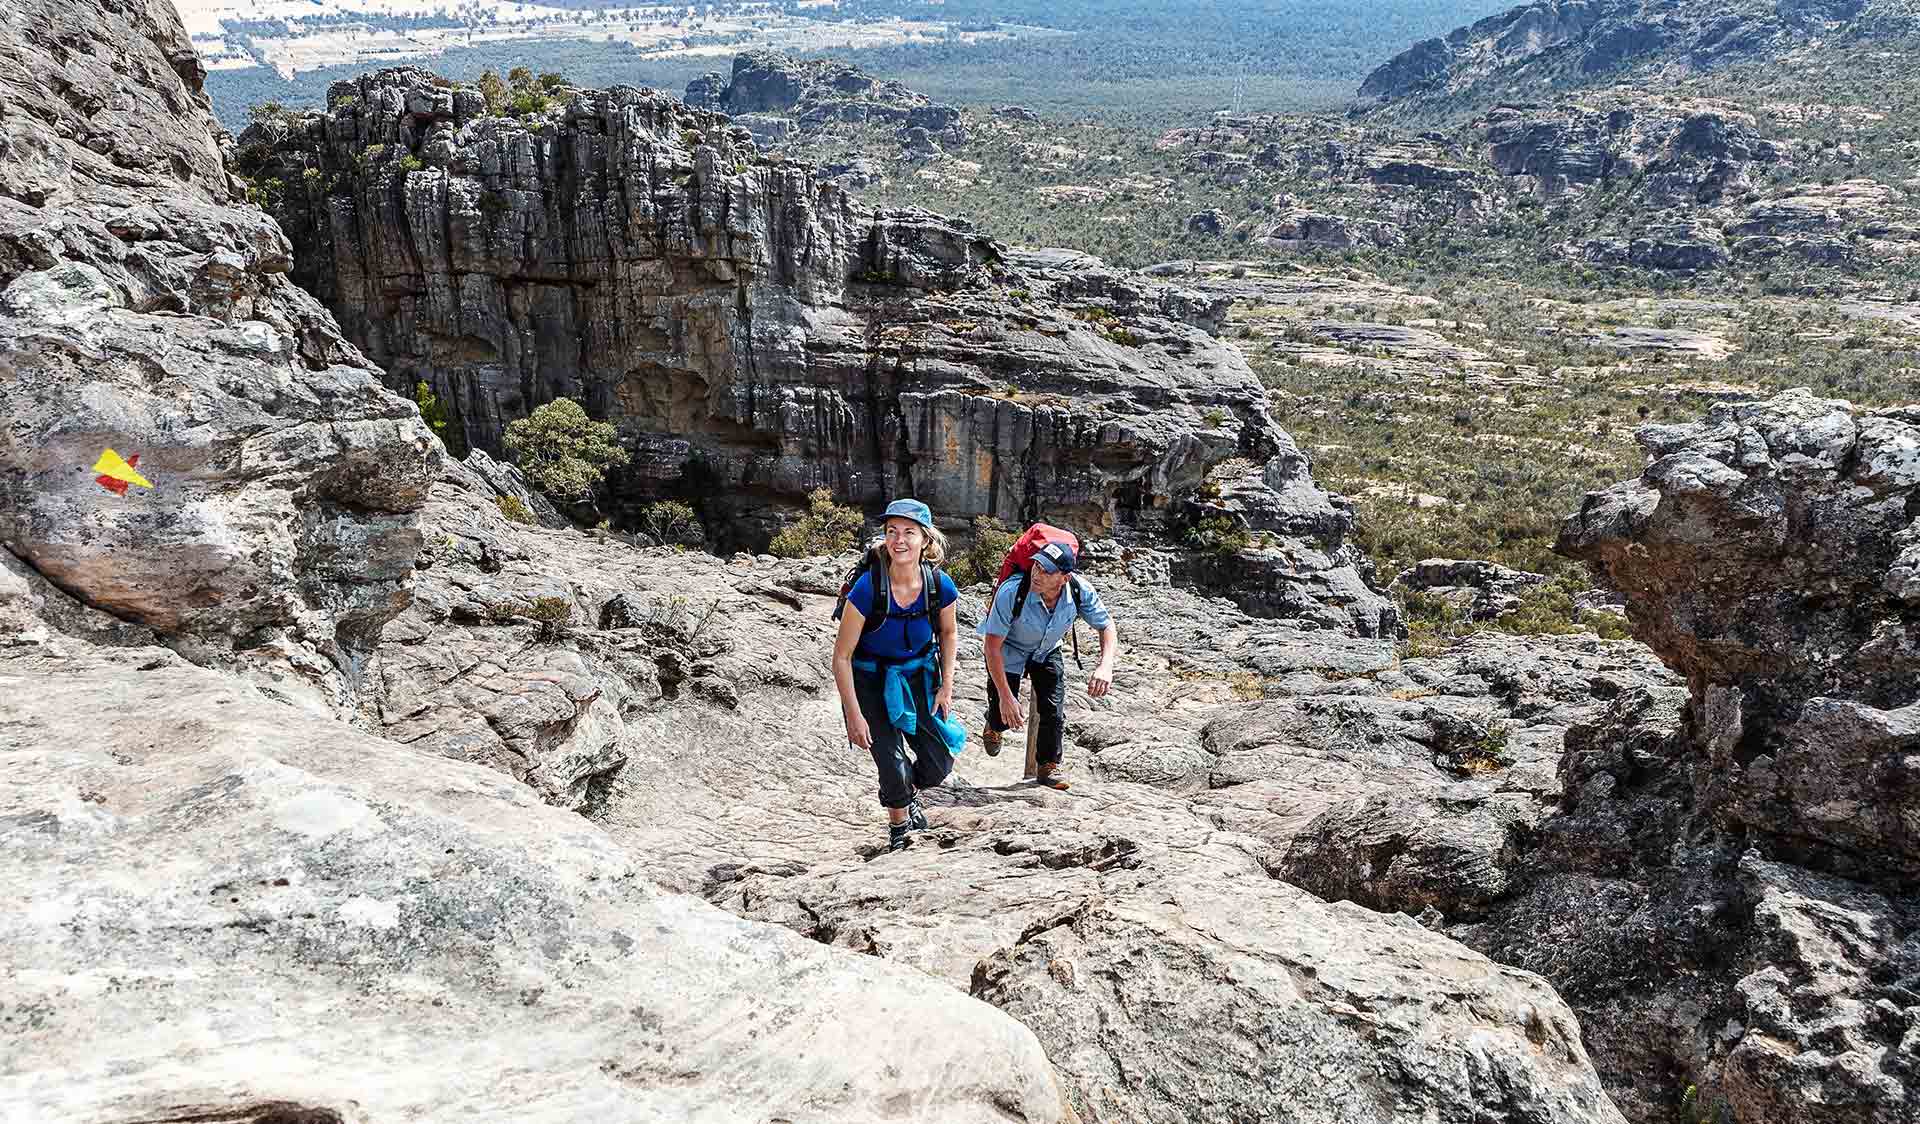 A man and woman climb up the rocky landscape of Mt Stapleton.